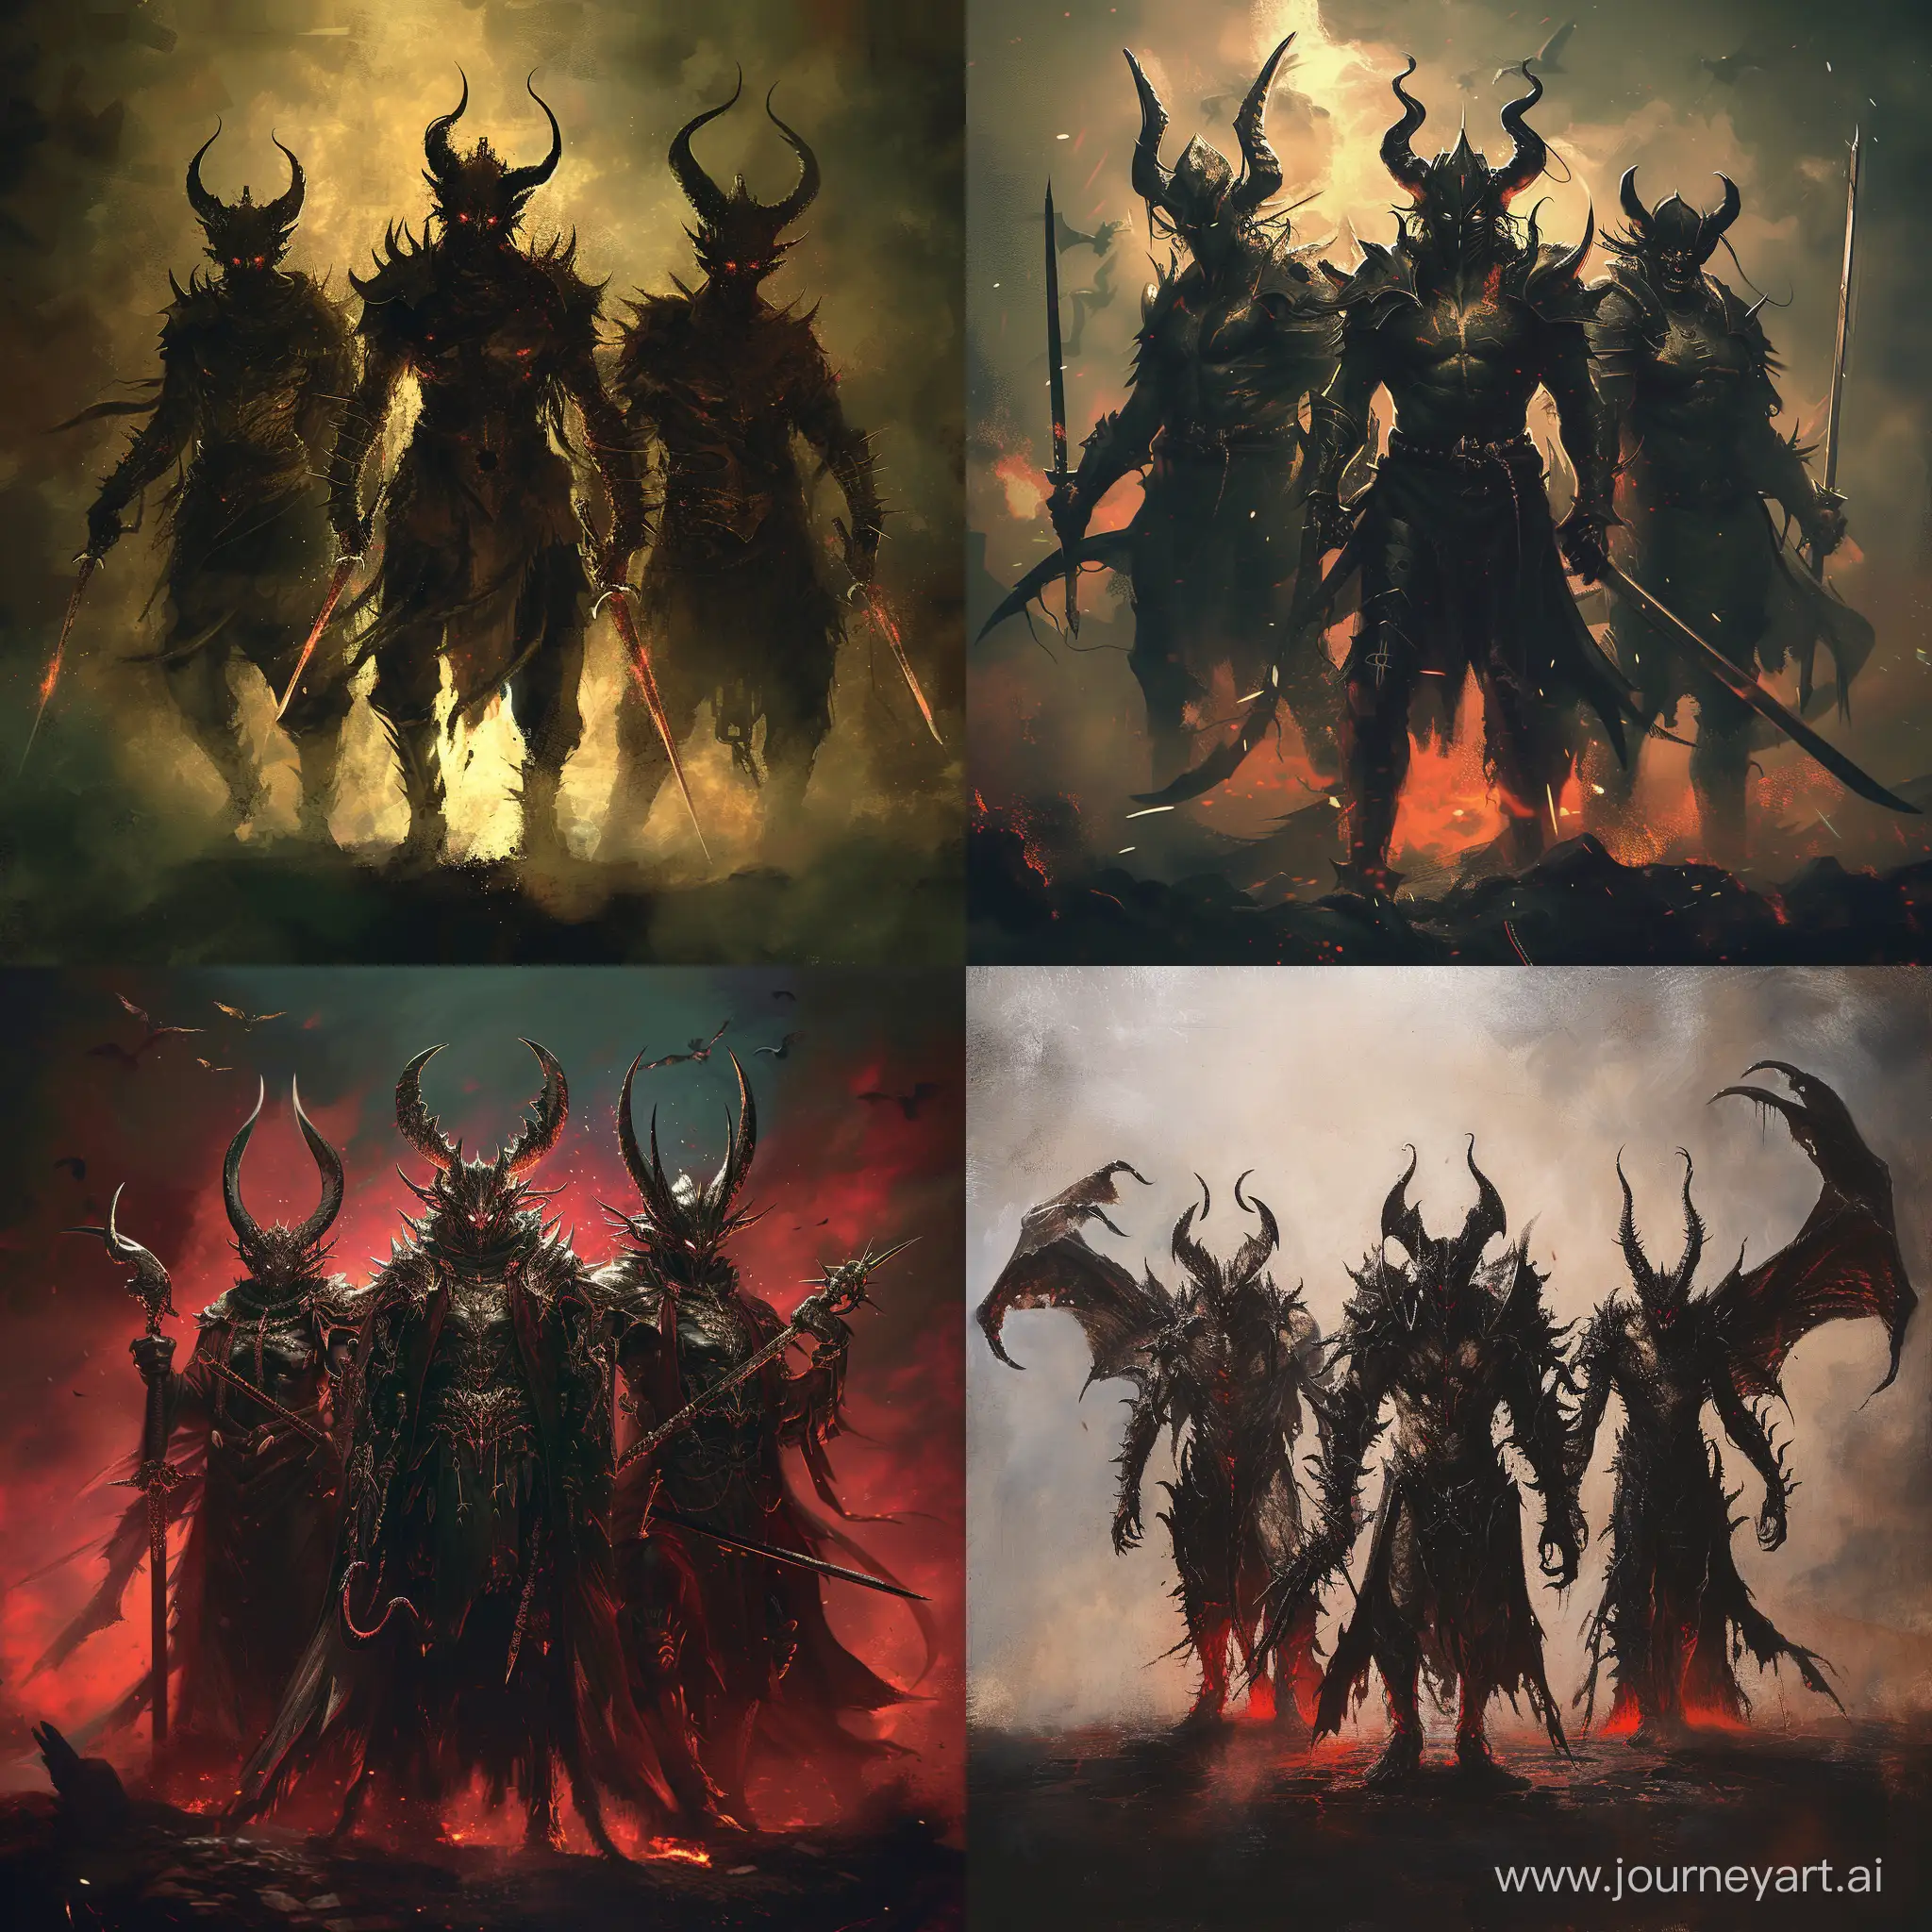 Three badass demons, preparing for the most gruesome war they’ve ever seen